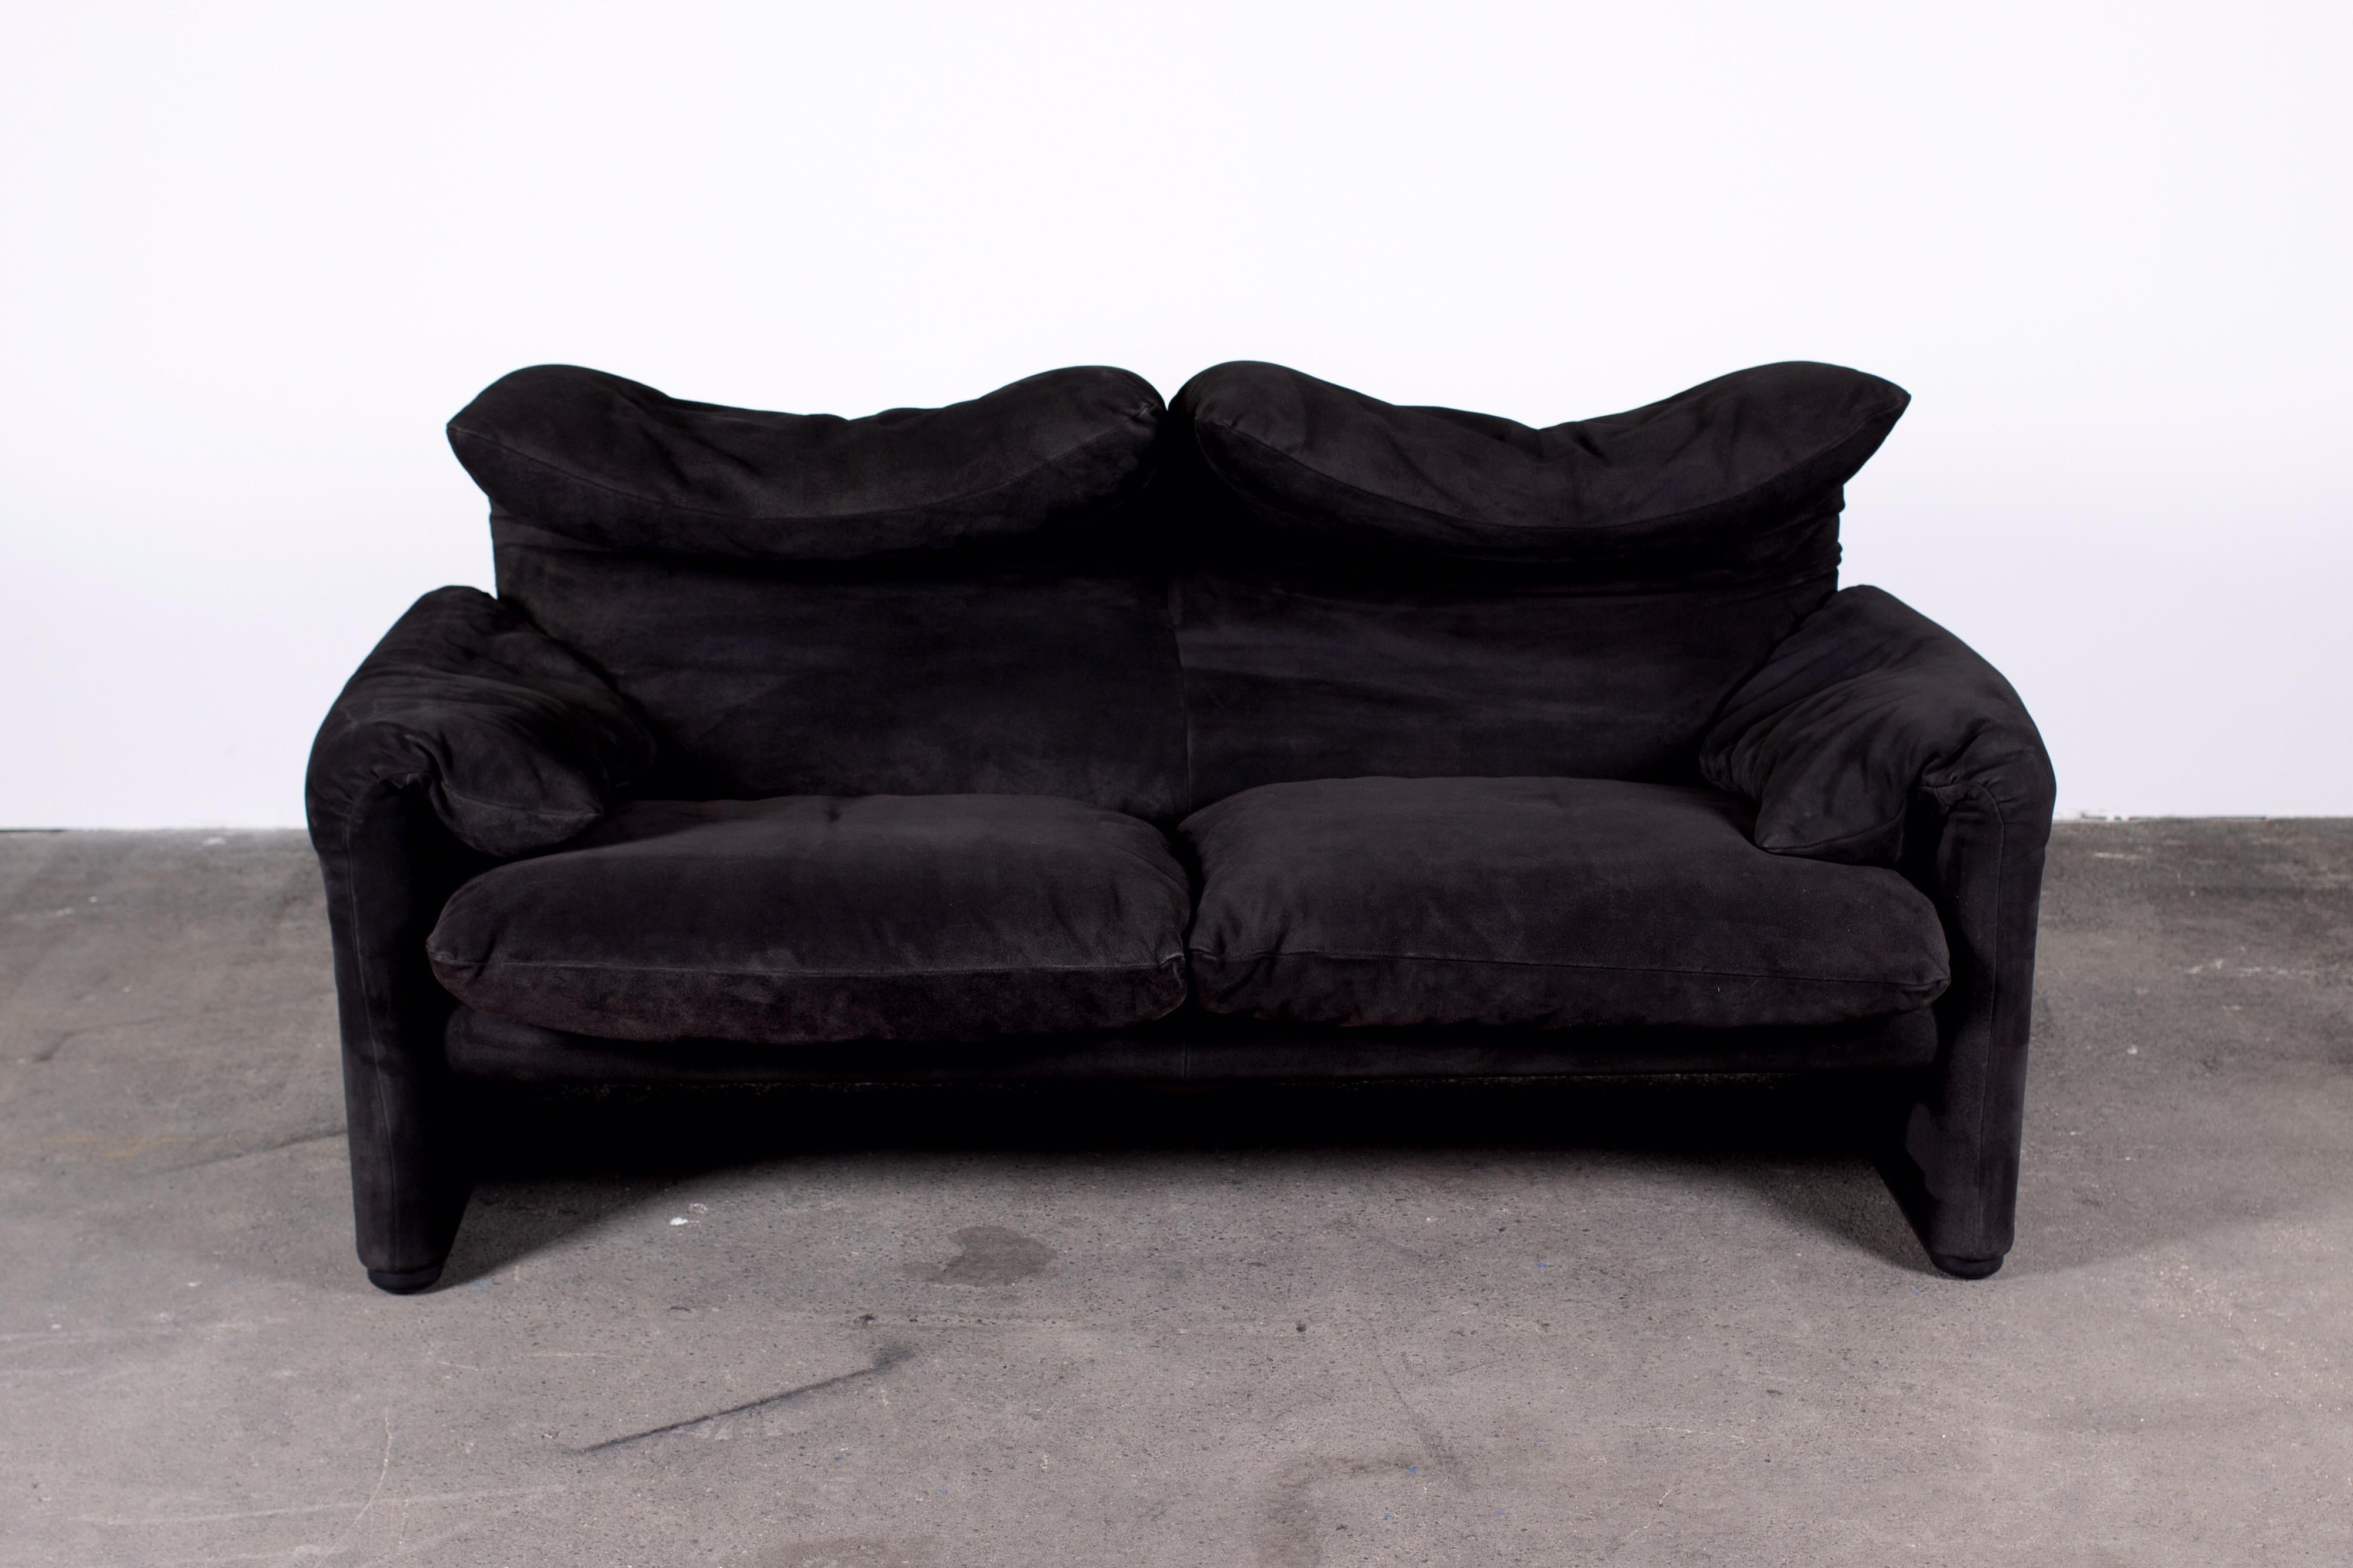 Pair of Black Suede 2-Seater Maralunga Sofas by Vico Magistretti for Cassina 4